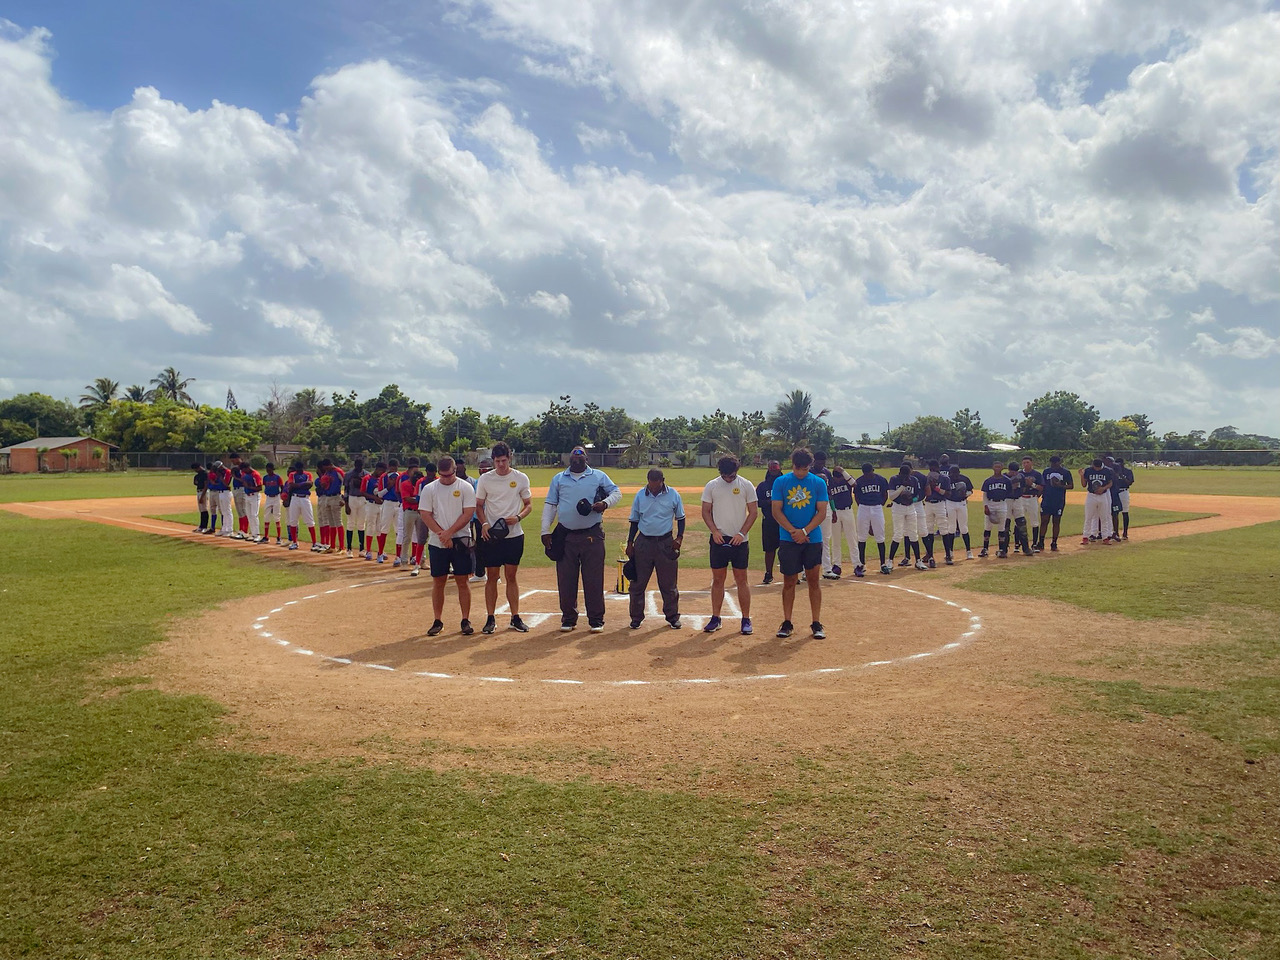 Moments before first pitch between two teams in the inaugural Blessed Feet tournament